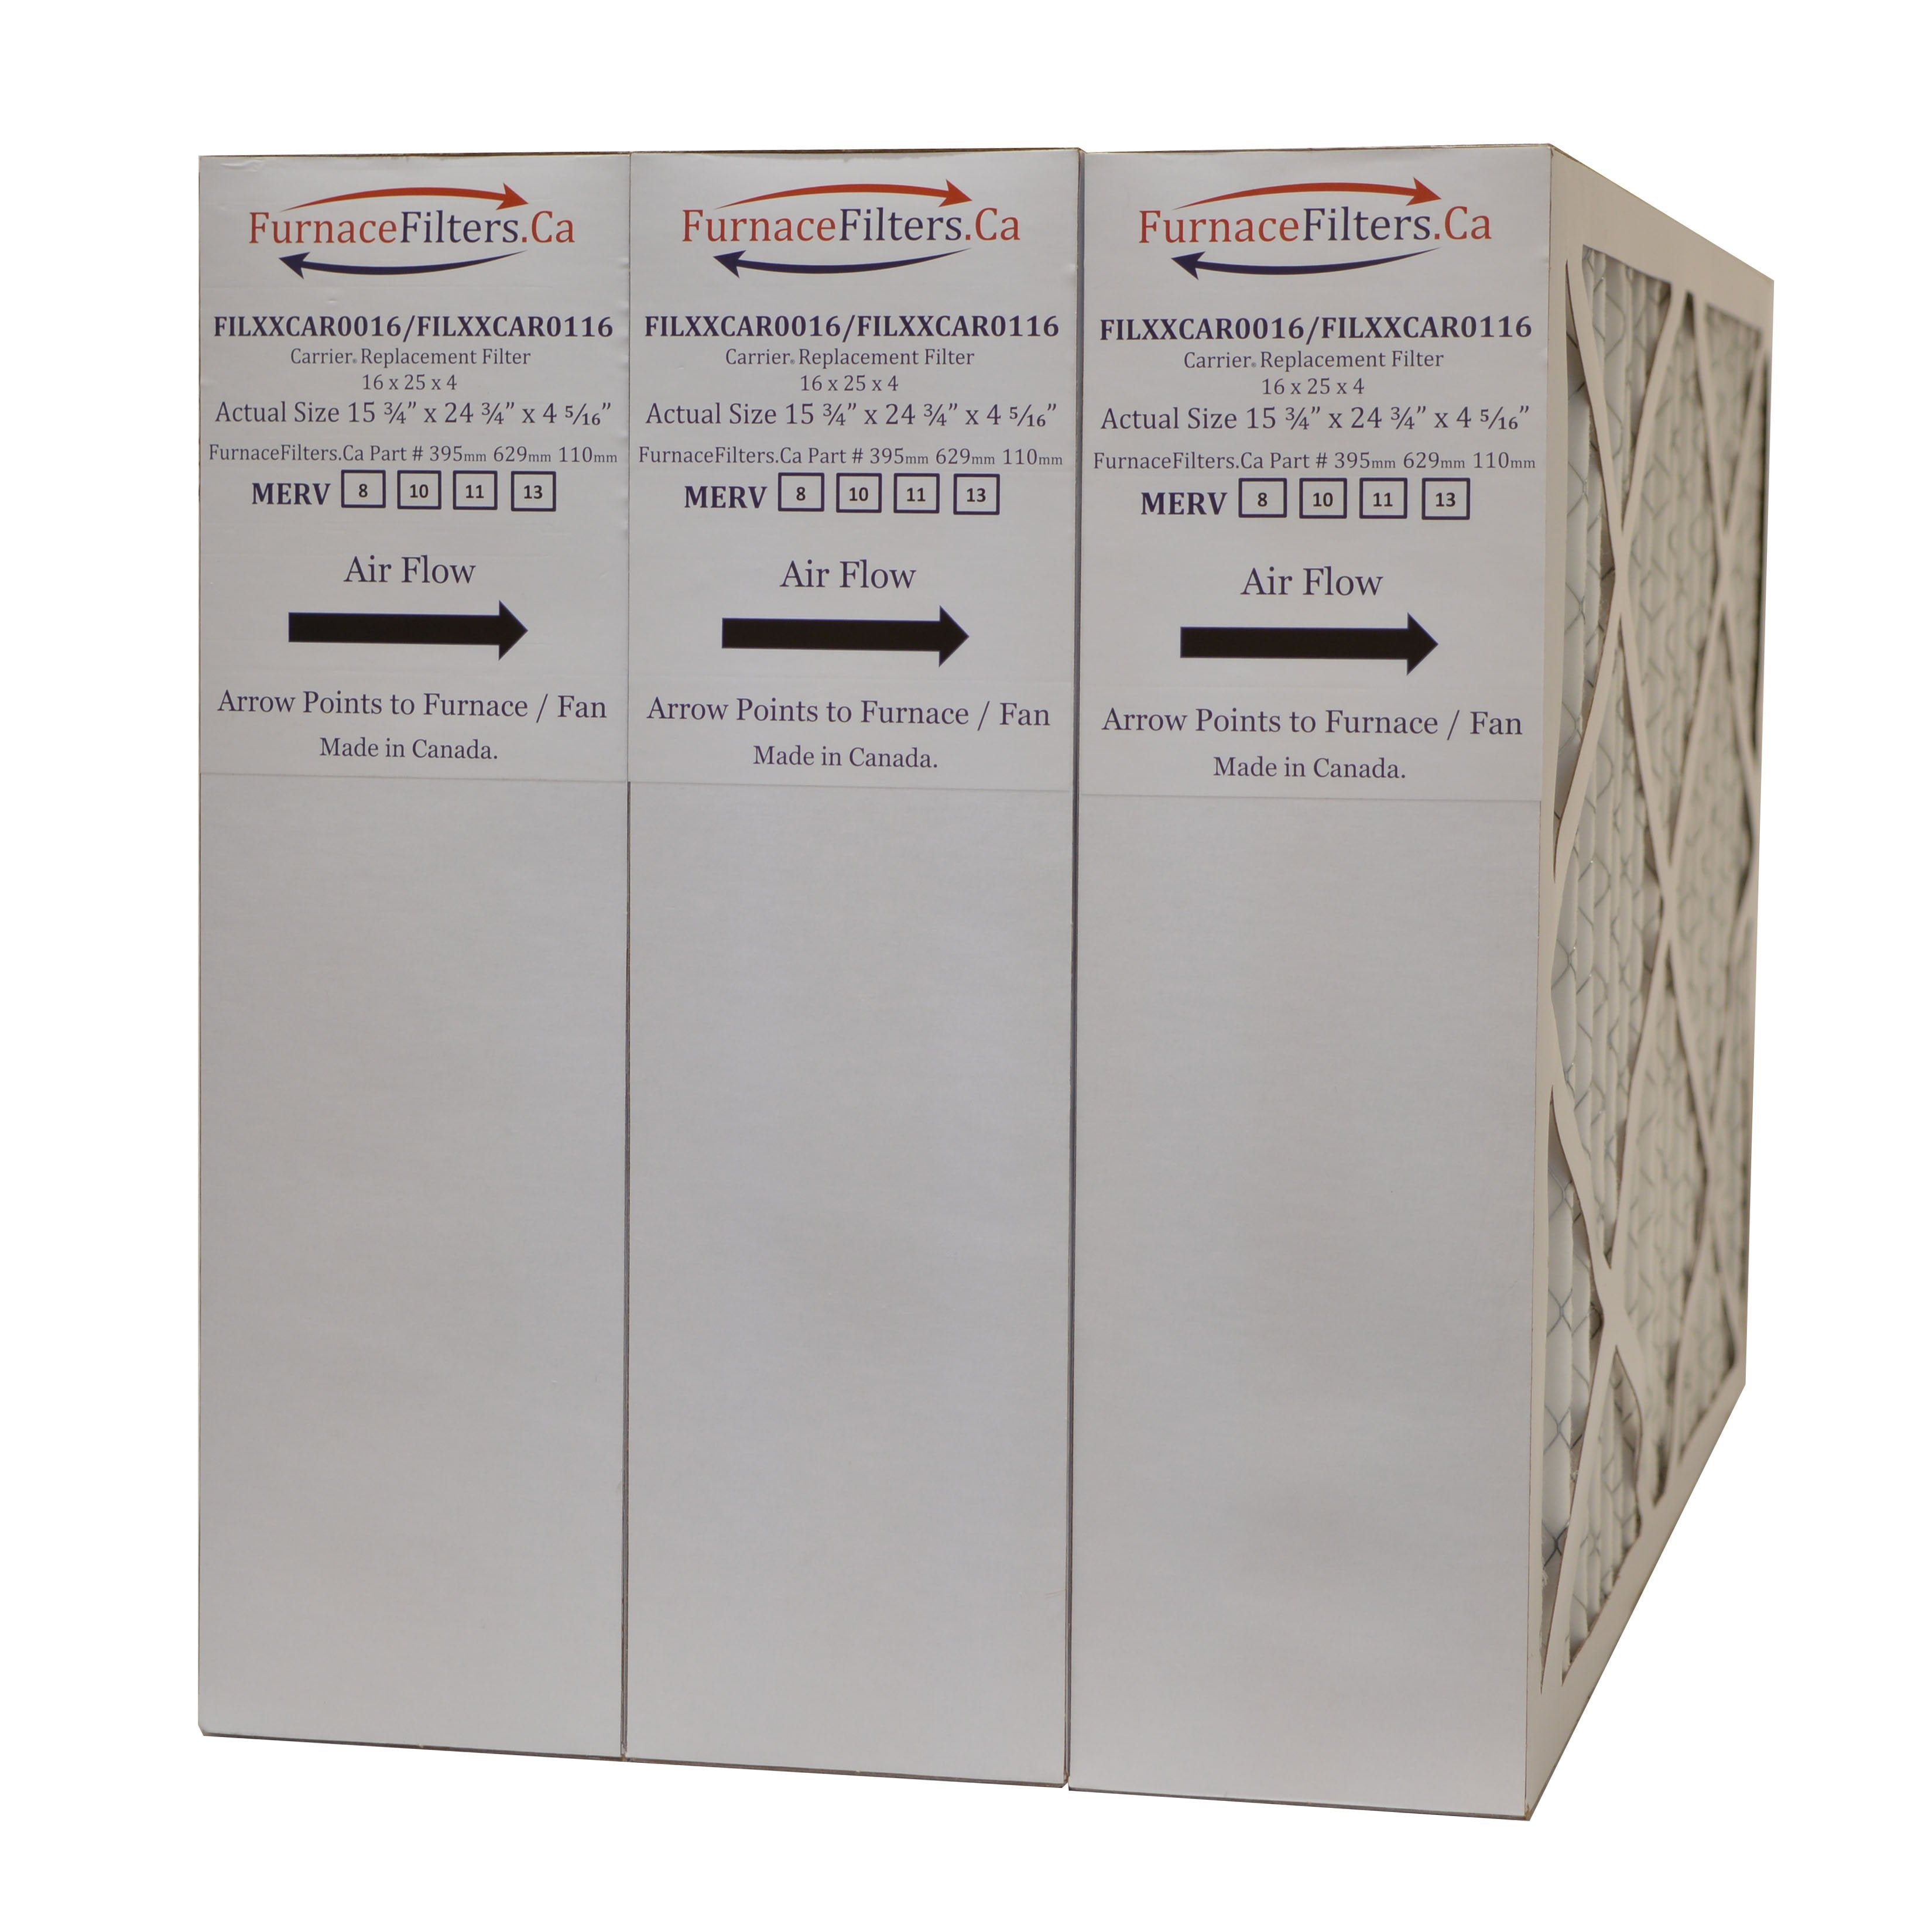 Carrier FILCCCAR0016 Furnace Filter Size 16 x 25 x 4 5/16. MERV 11. -- Case of 3 Made in Canada by FurnaceFilters.Ca